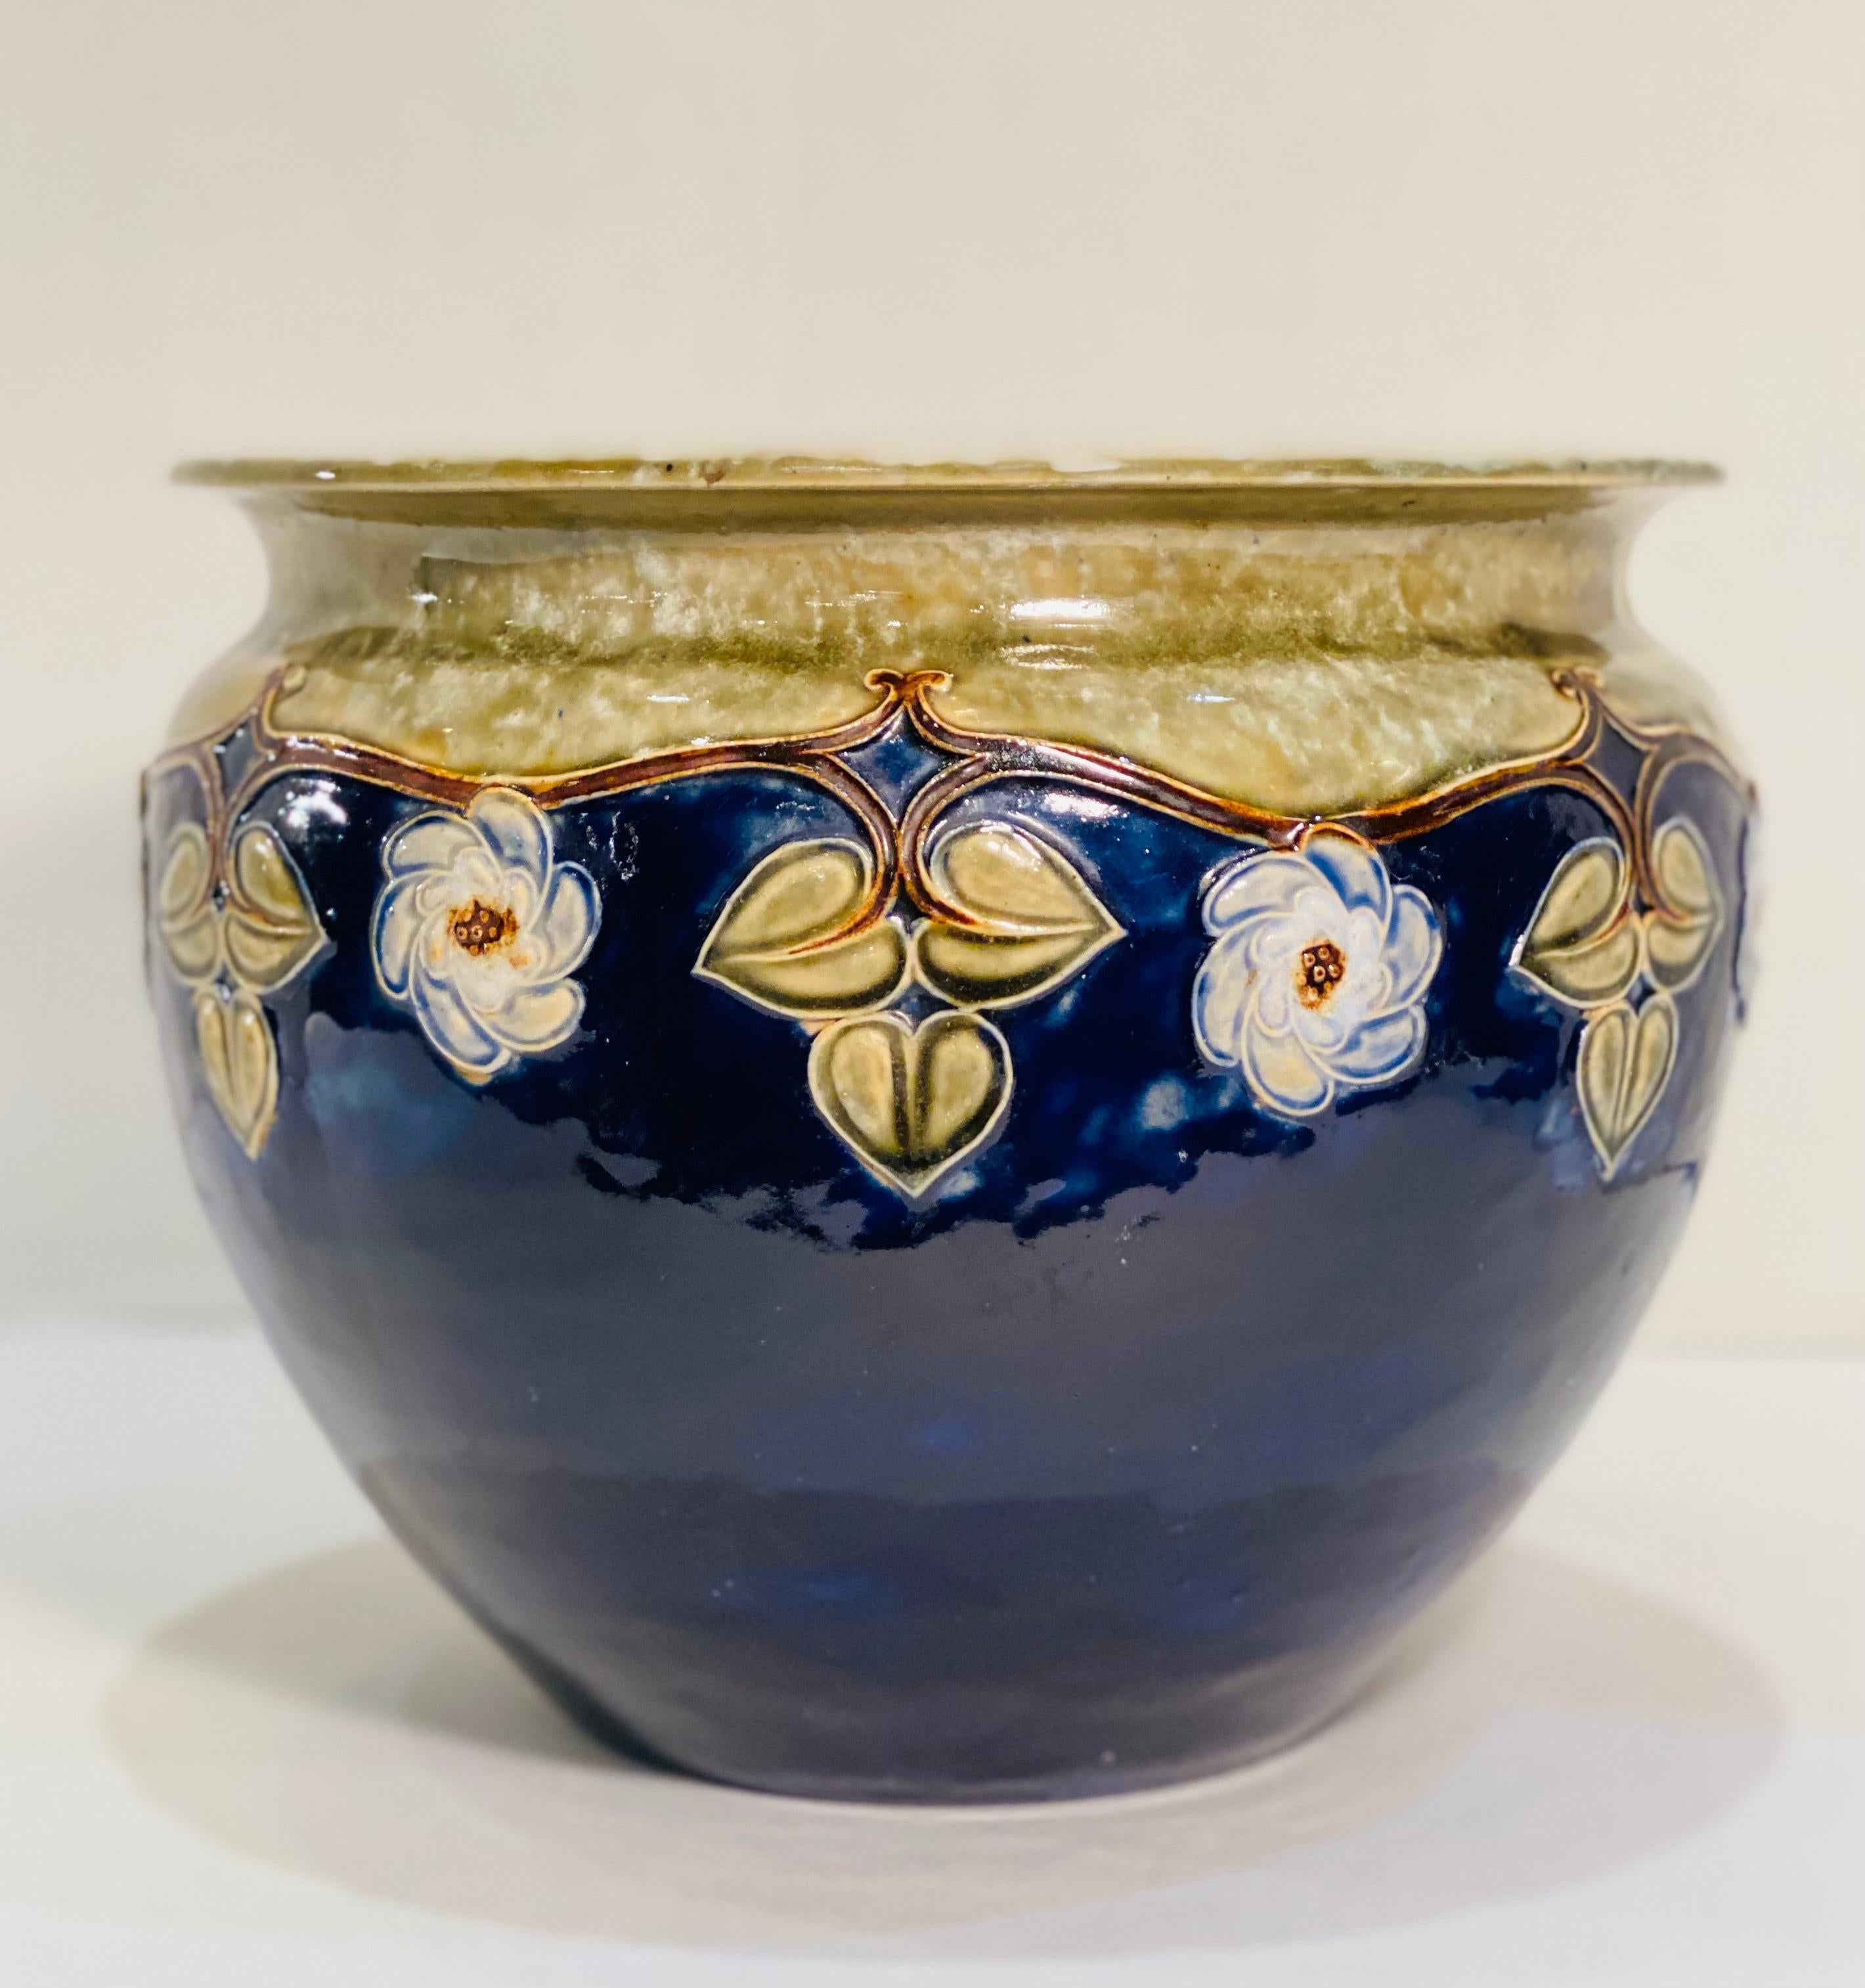 Beautiful hand made antique art pottery rimmed jardiniere pot or planter made by Royal Doulton factory of England. Circa approximately 1906 to 1910 in the period of Art Nouveau. This pot would also look great in an Arts and Crafts decor home or any